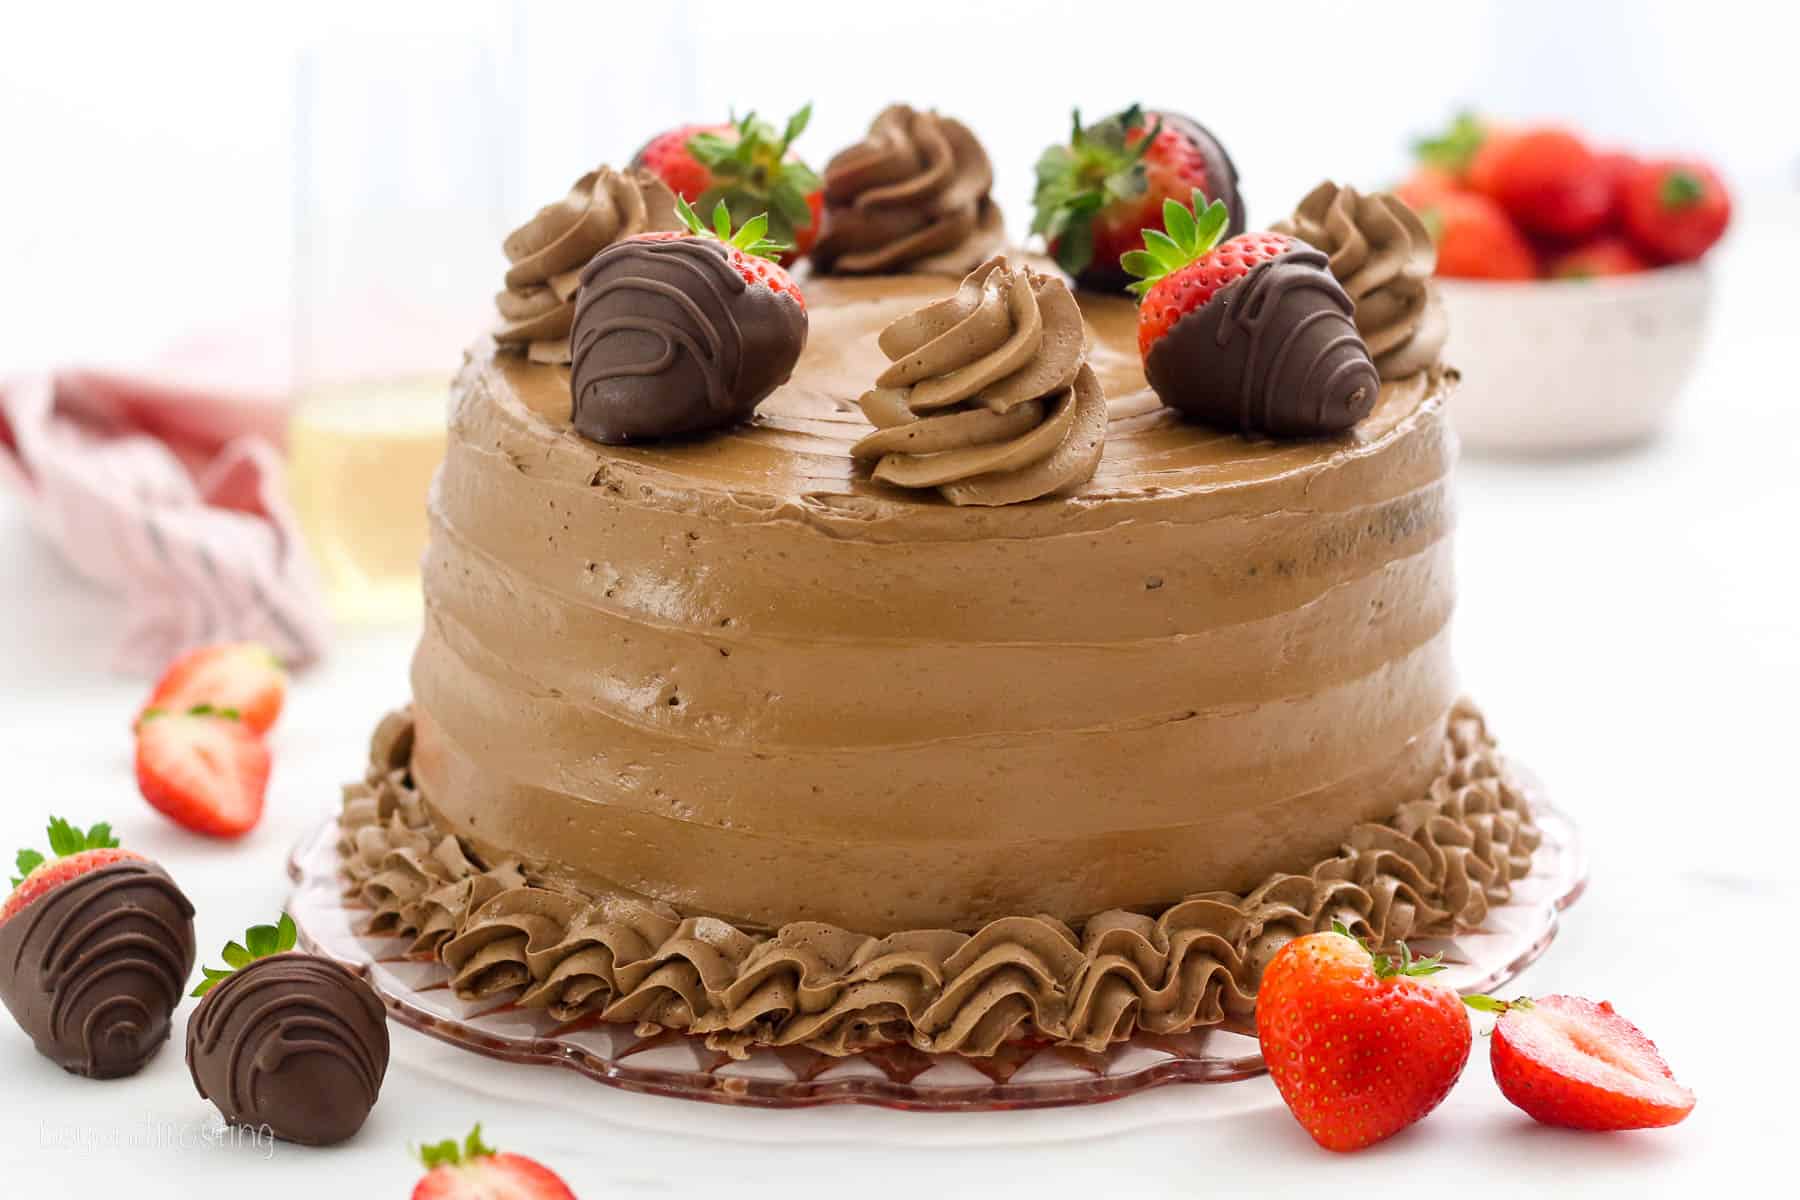 Chocolate strawberry cake decorated with chocolate frosting swirls and chocolate covered strawberries.